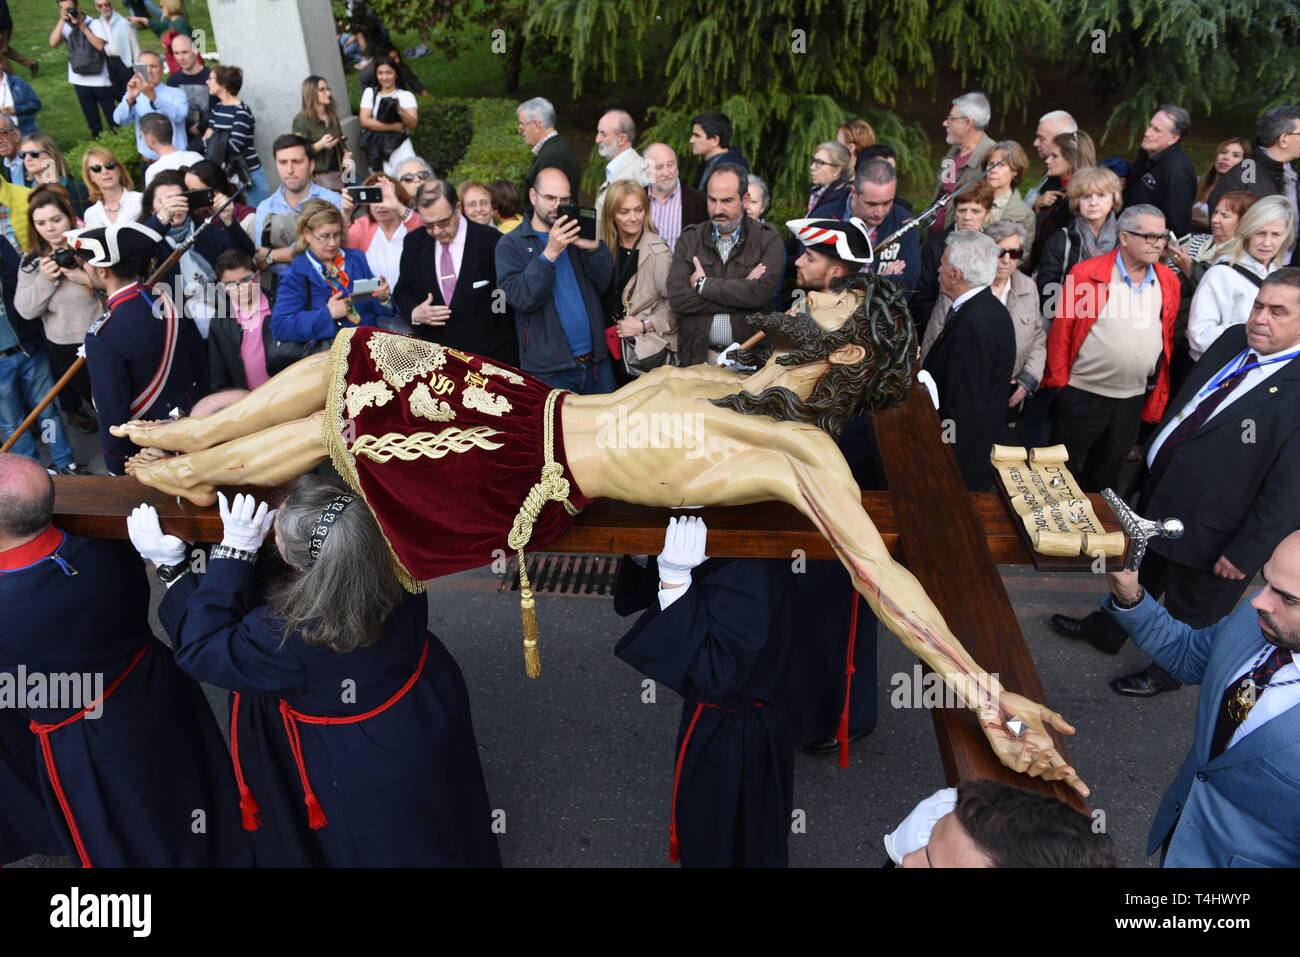 Madrid, Madrid, Spain. 16th Apr, 2019. Penitents from 'Cristo de Los Alabarderos' brotherhood are seen carrying a statue of Jesus Christ during the 'Cristo de Los Alabarderos' procession in Madrid.Cristo de Los Alabarderos procession, also known as the procession of Spanish Royal Guard, took place on the Holy Tuesday and in Good Friday in Madrid. Penitents carried a statue of Jesus Christ from 'De las Fuerzas Armadas' church to 'Real' palace in central Madrid and on Good Friday penitents will march in reverse, this has been celebrated since 1753 and it is one of the most important processio Stock Photo